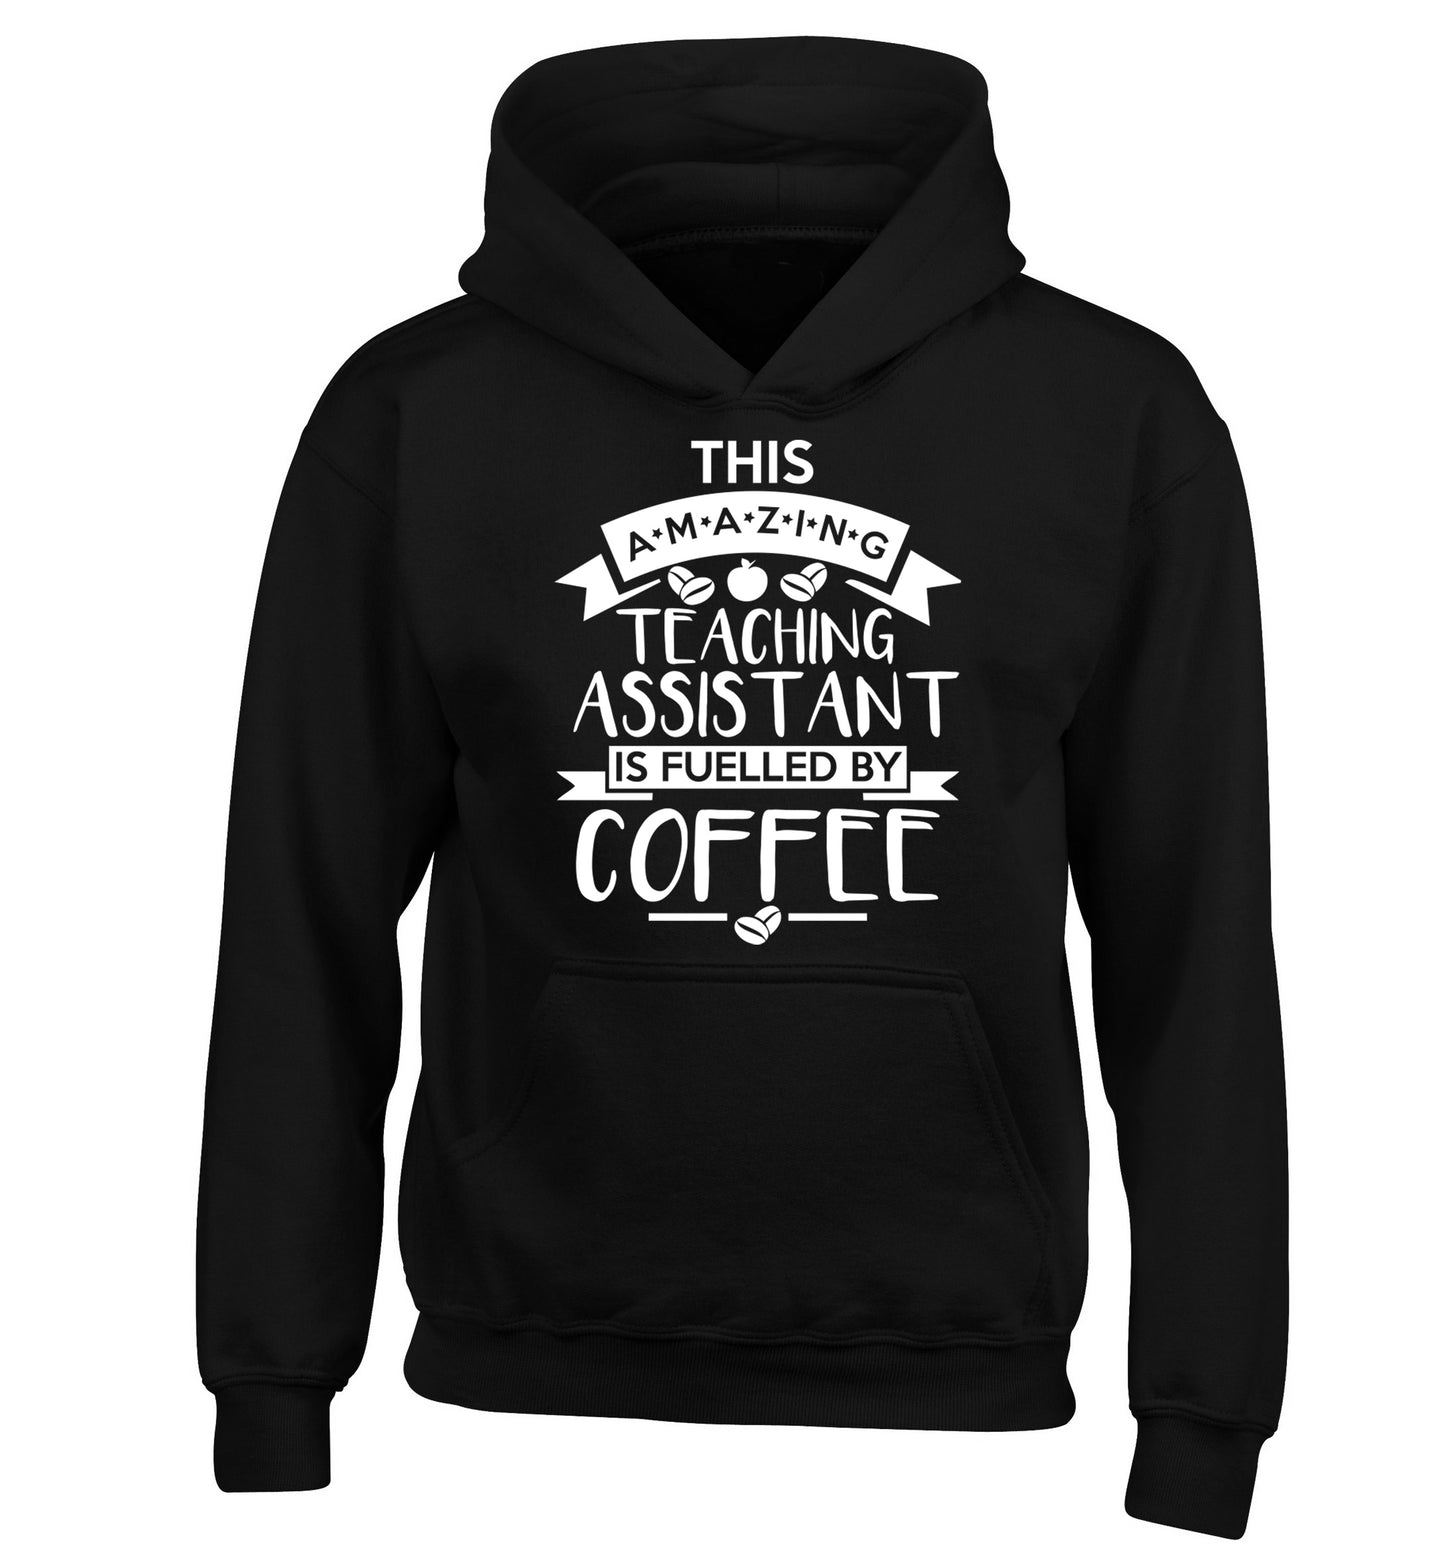 This amazing teaching assistant is fuelled by coffee children's black hoodie 12-13 Years